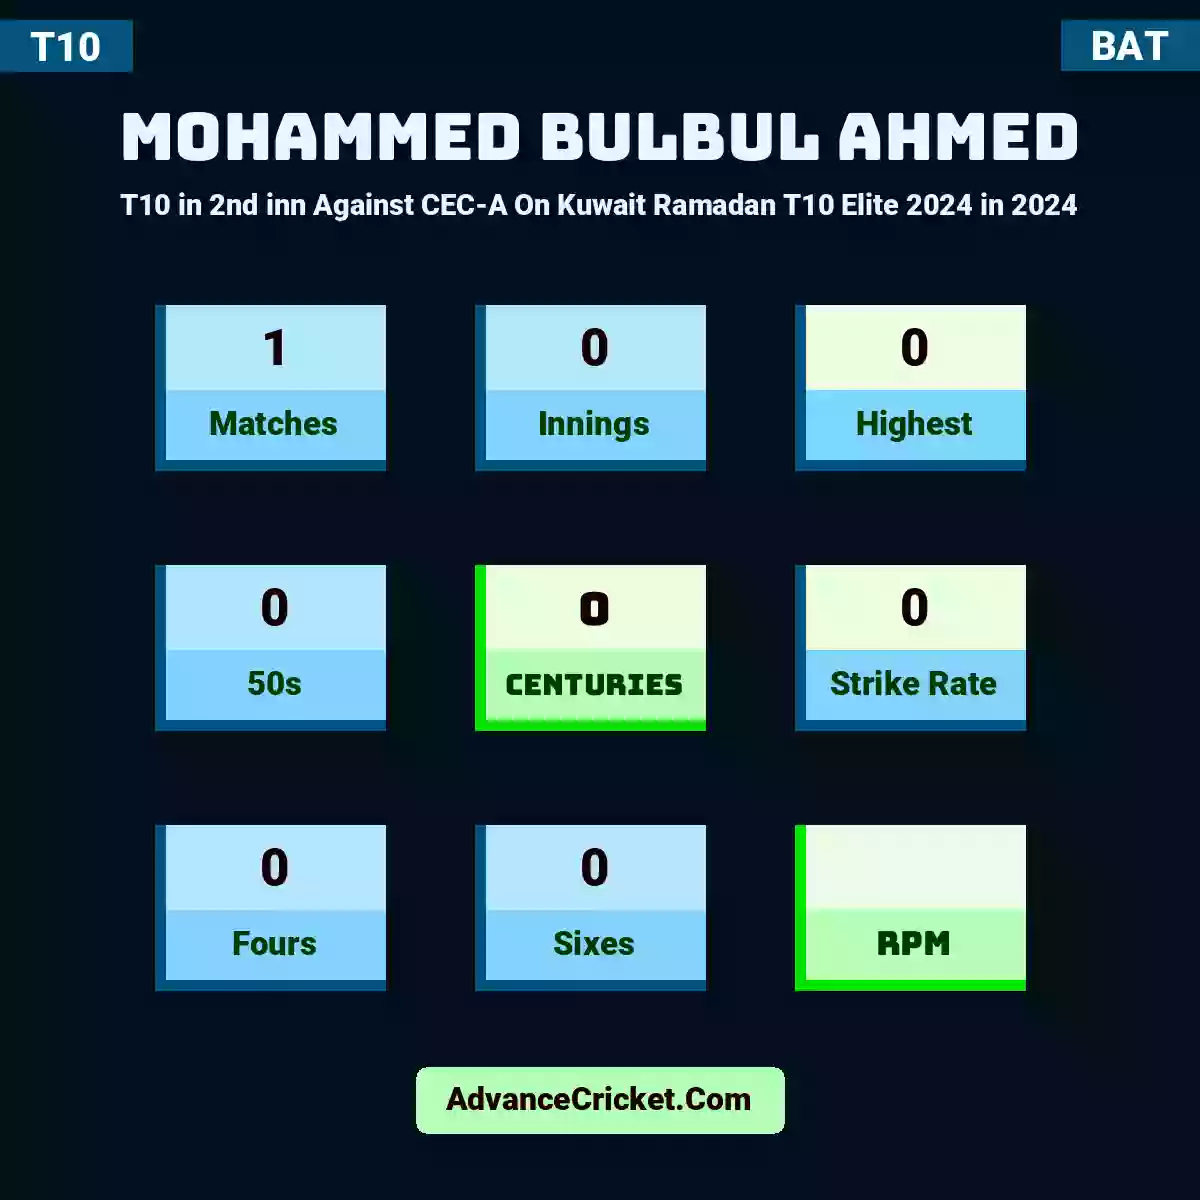 Mohammed Bulbul Ahmed T10  in 2nd inn Against CEC-A On Kuwait Ramadan T10 Elite 2024 in 2024, Mohammed Bulbul Ahmed played 1 matches, scored 0 runs as highest, 0 half-centuries, and 0 centuries, with a strike rate of 0. M.Bulbul.Ahmed hit 0 fours and 0 sixes.